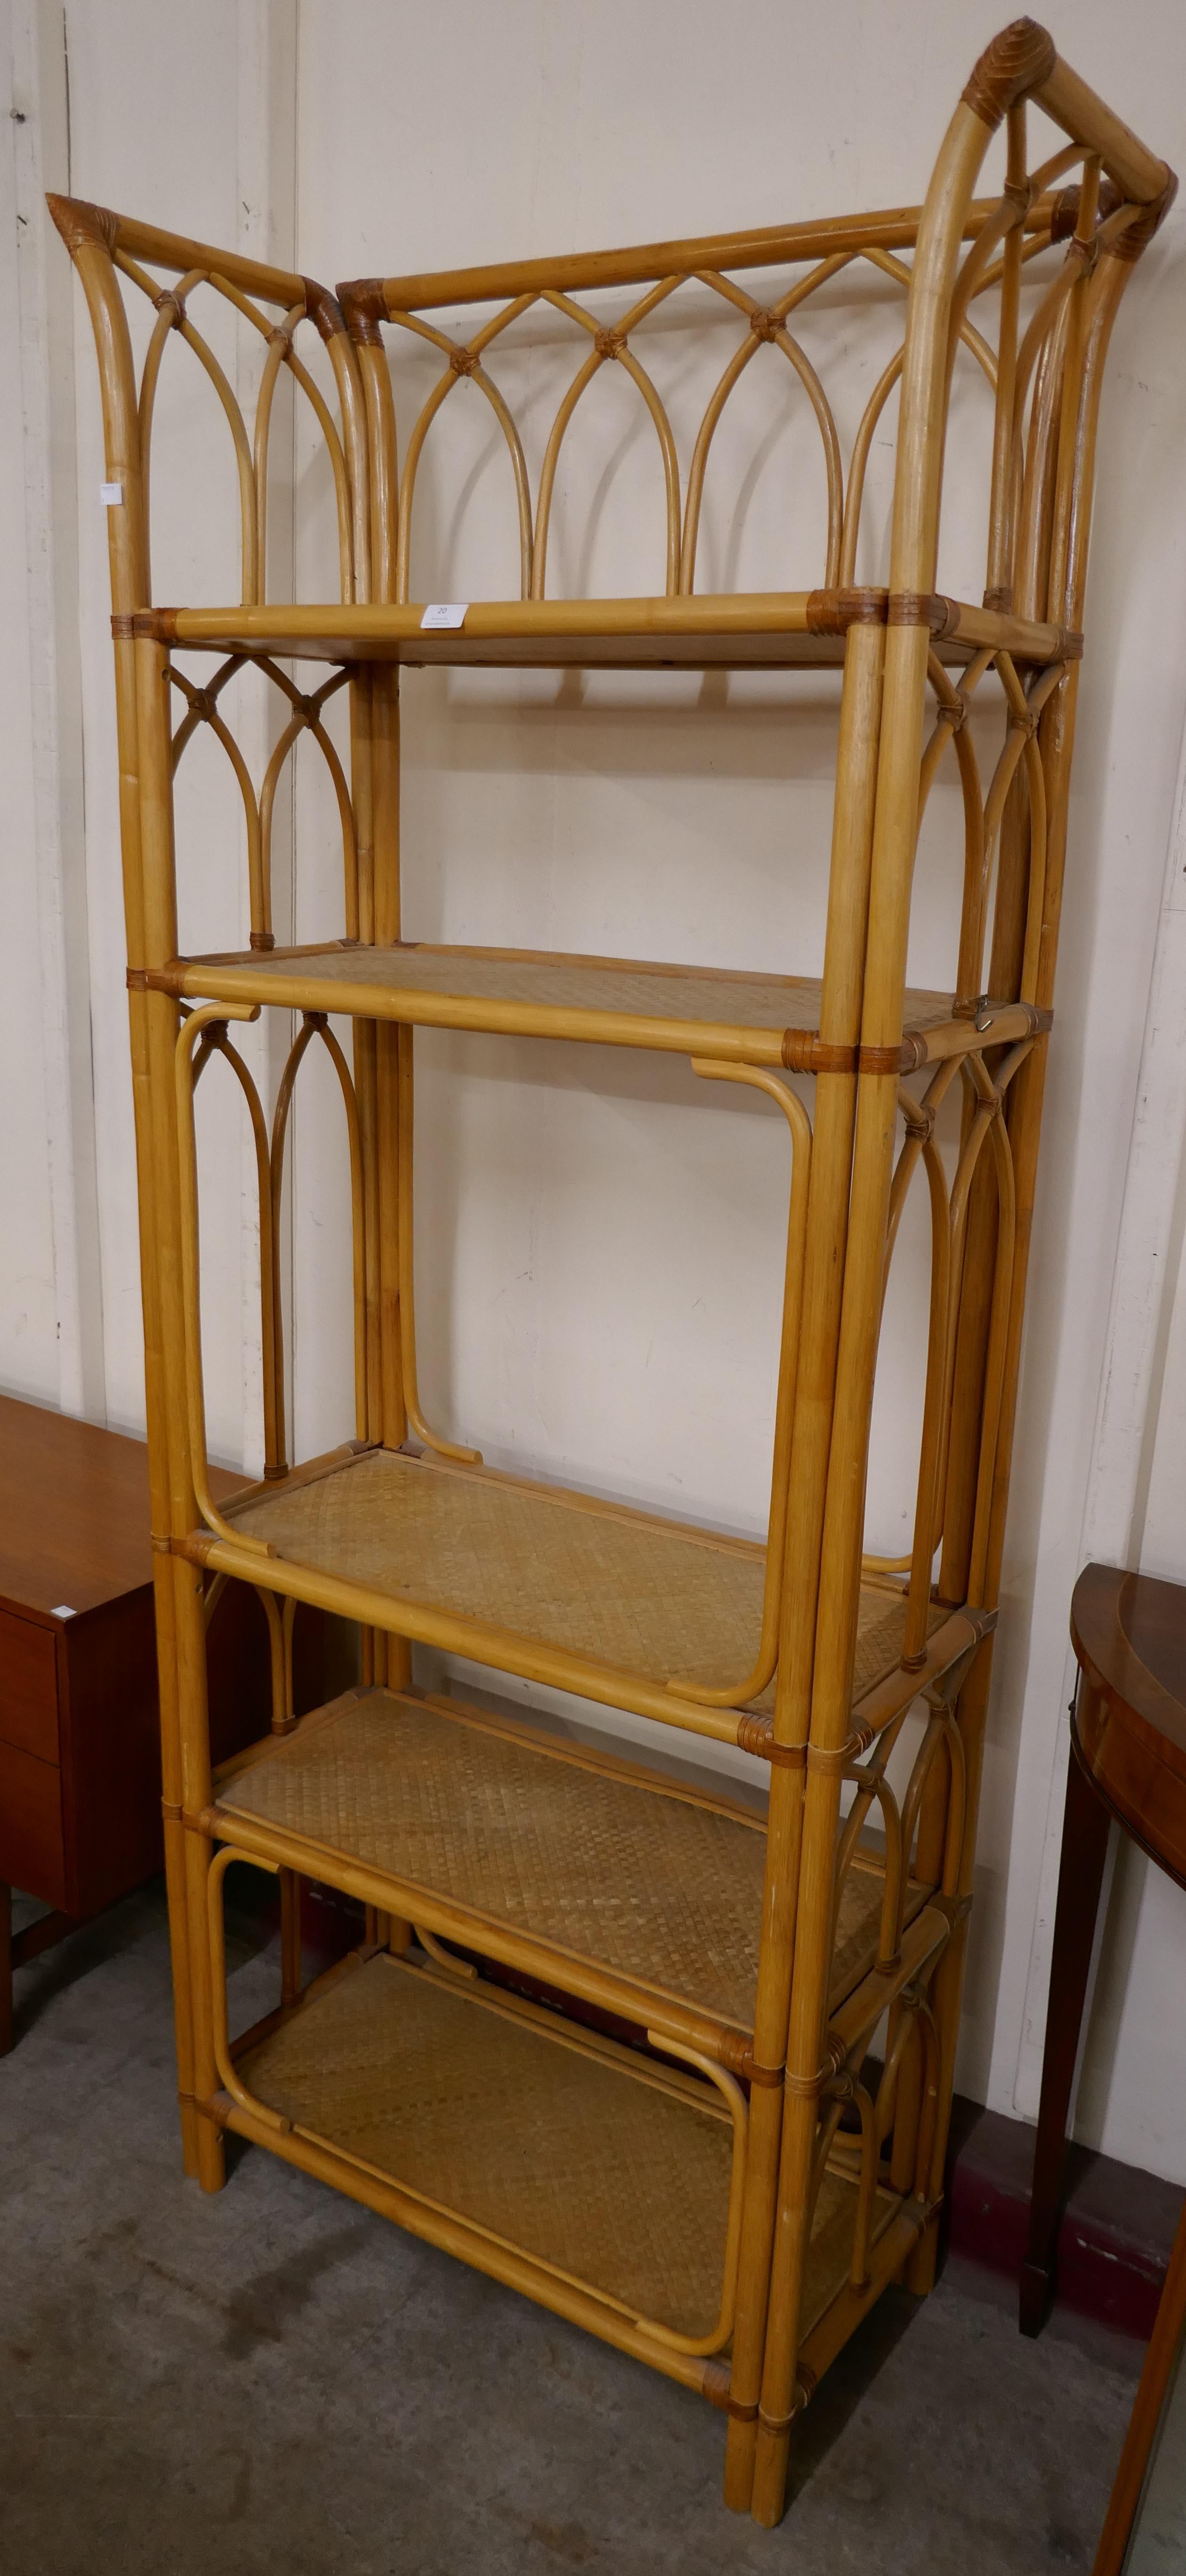 A bamboo five tier room divider